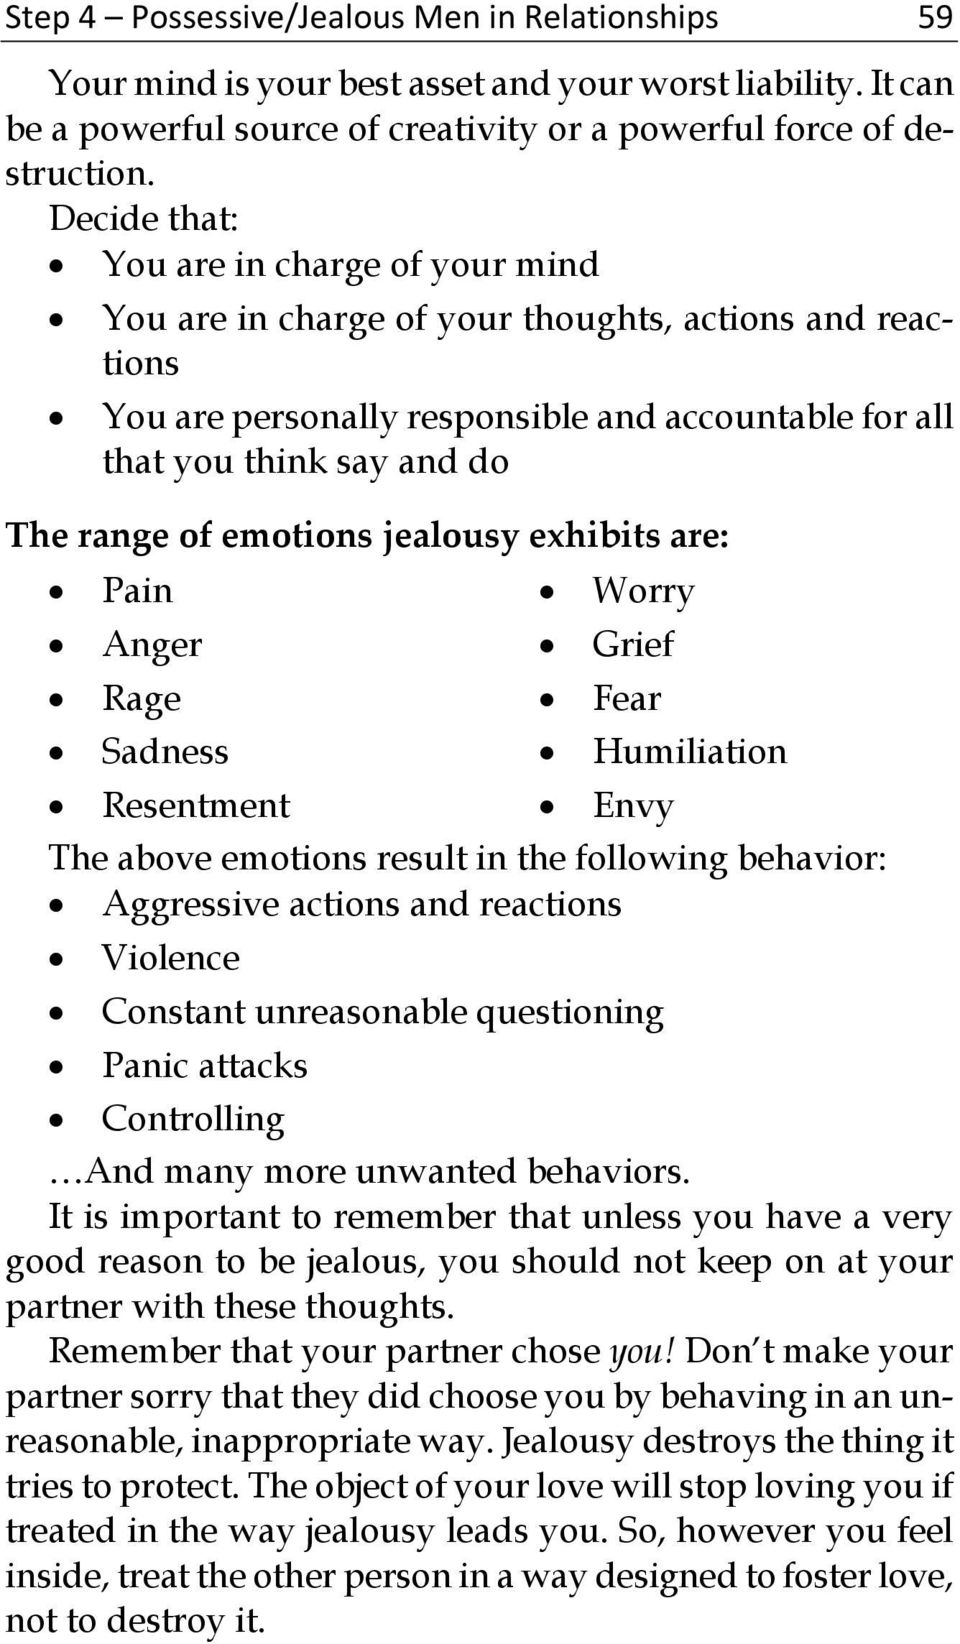 emotions jealousy exhibits are: Pain Worry Anger Grief Rage Fear Sadness Humiliation Resentment Envy The above emotions result in the following behavior: Aggressive actions and reactions Violence